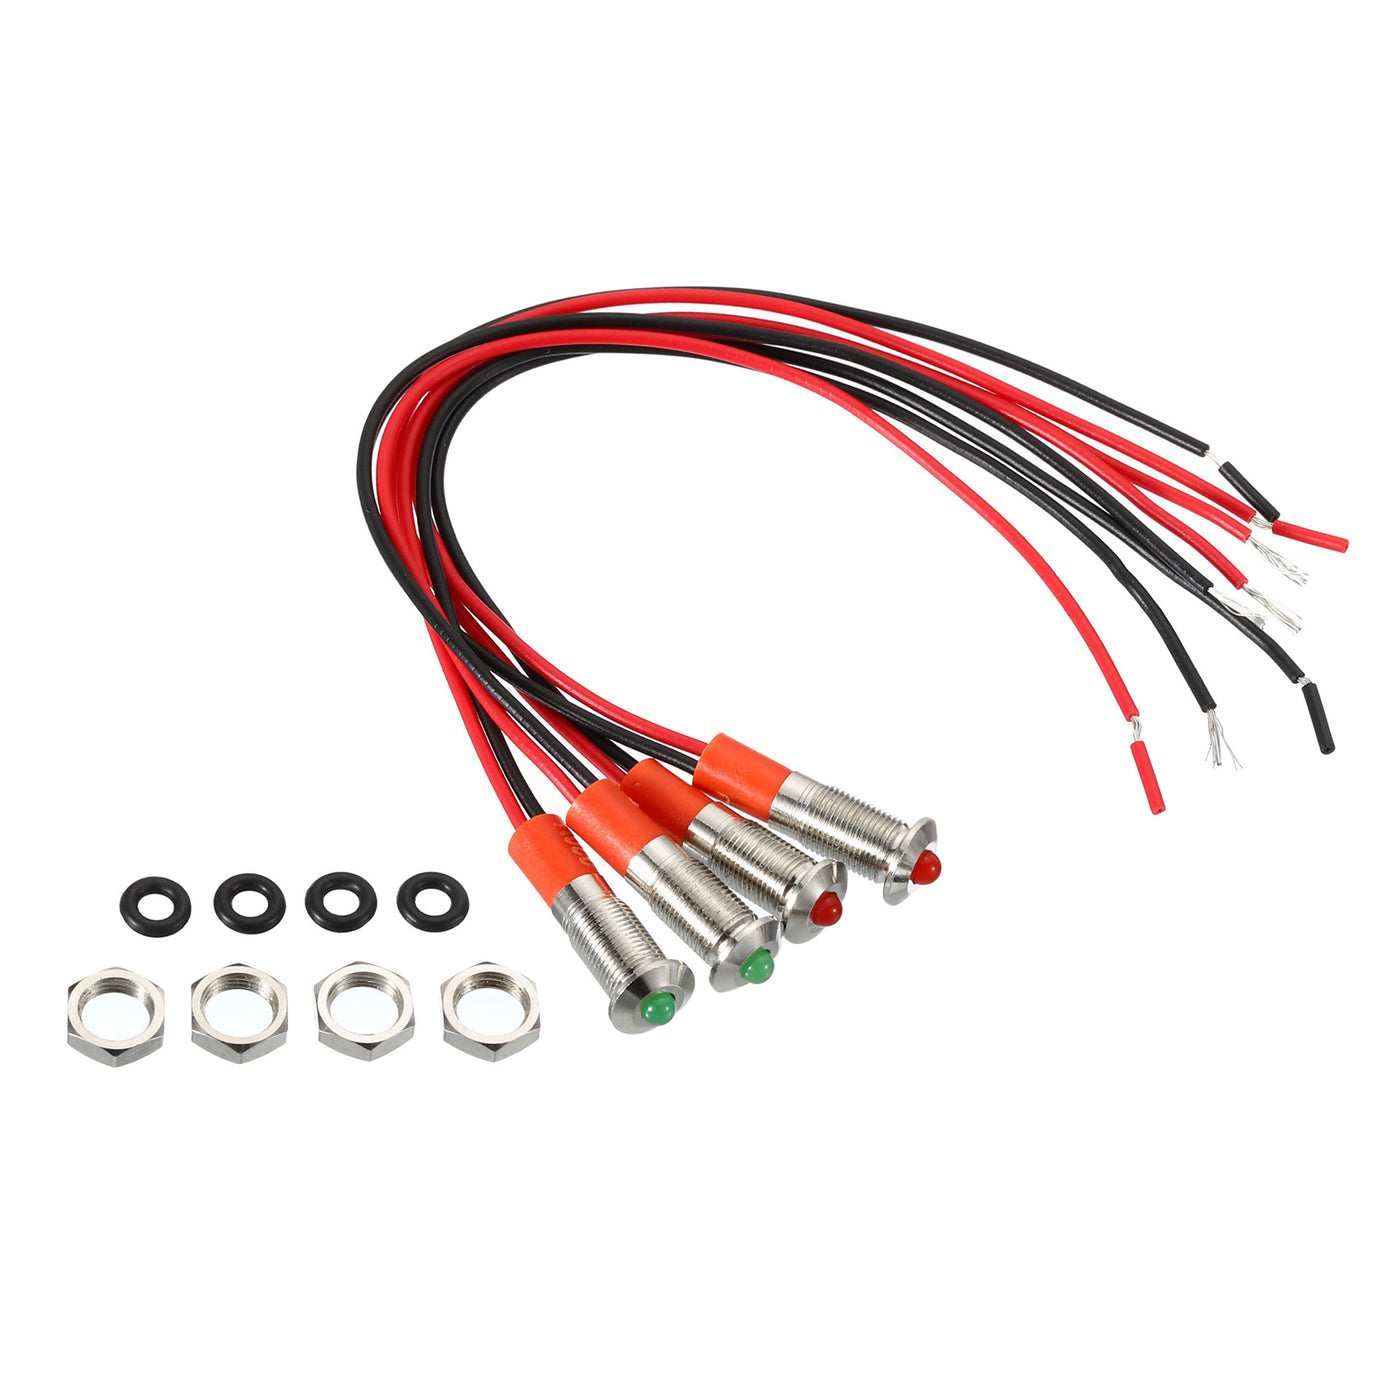 Harfington 4Pcs 220V 6mm Indicator Lights Convex Head Panel Mount with Cable Red Green